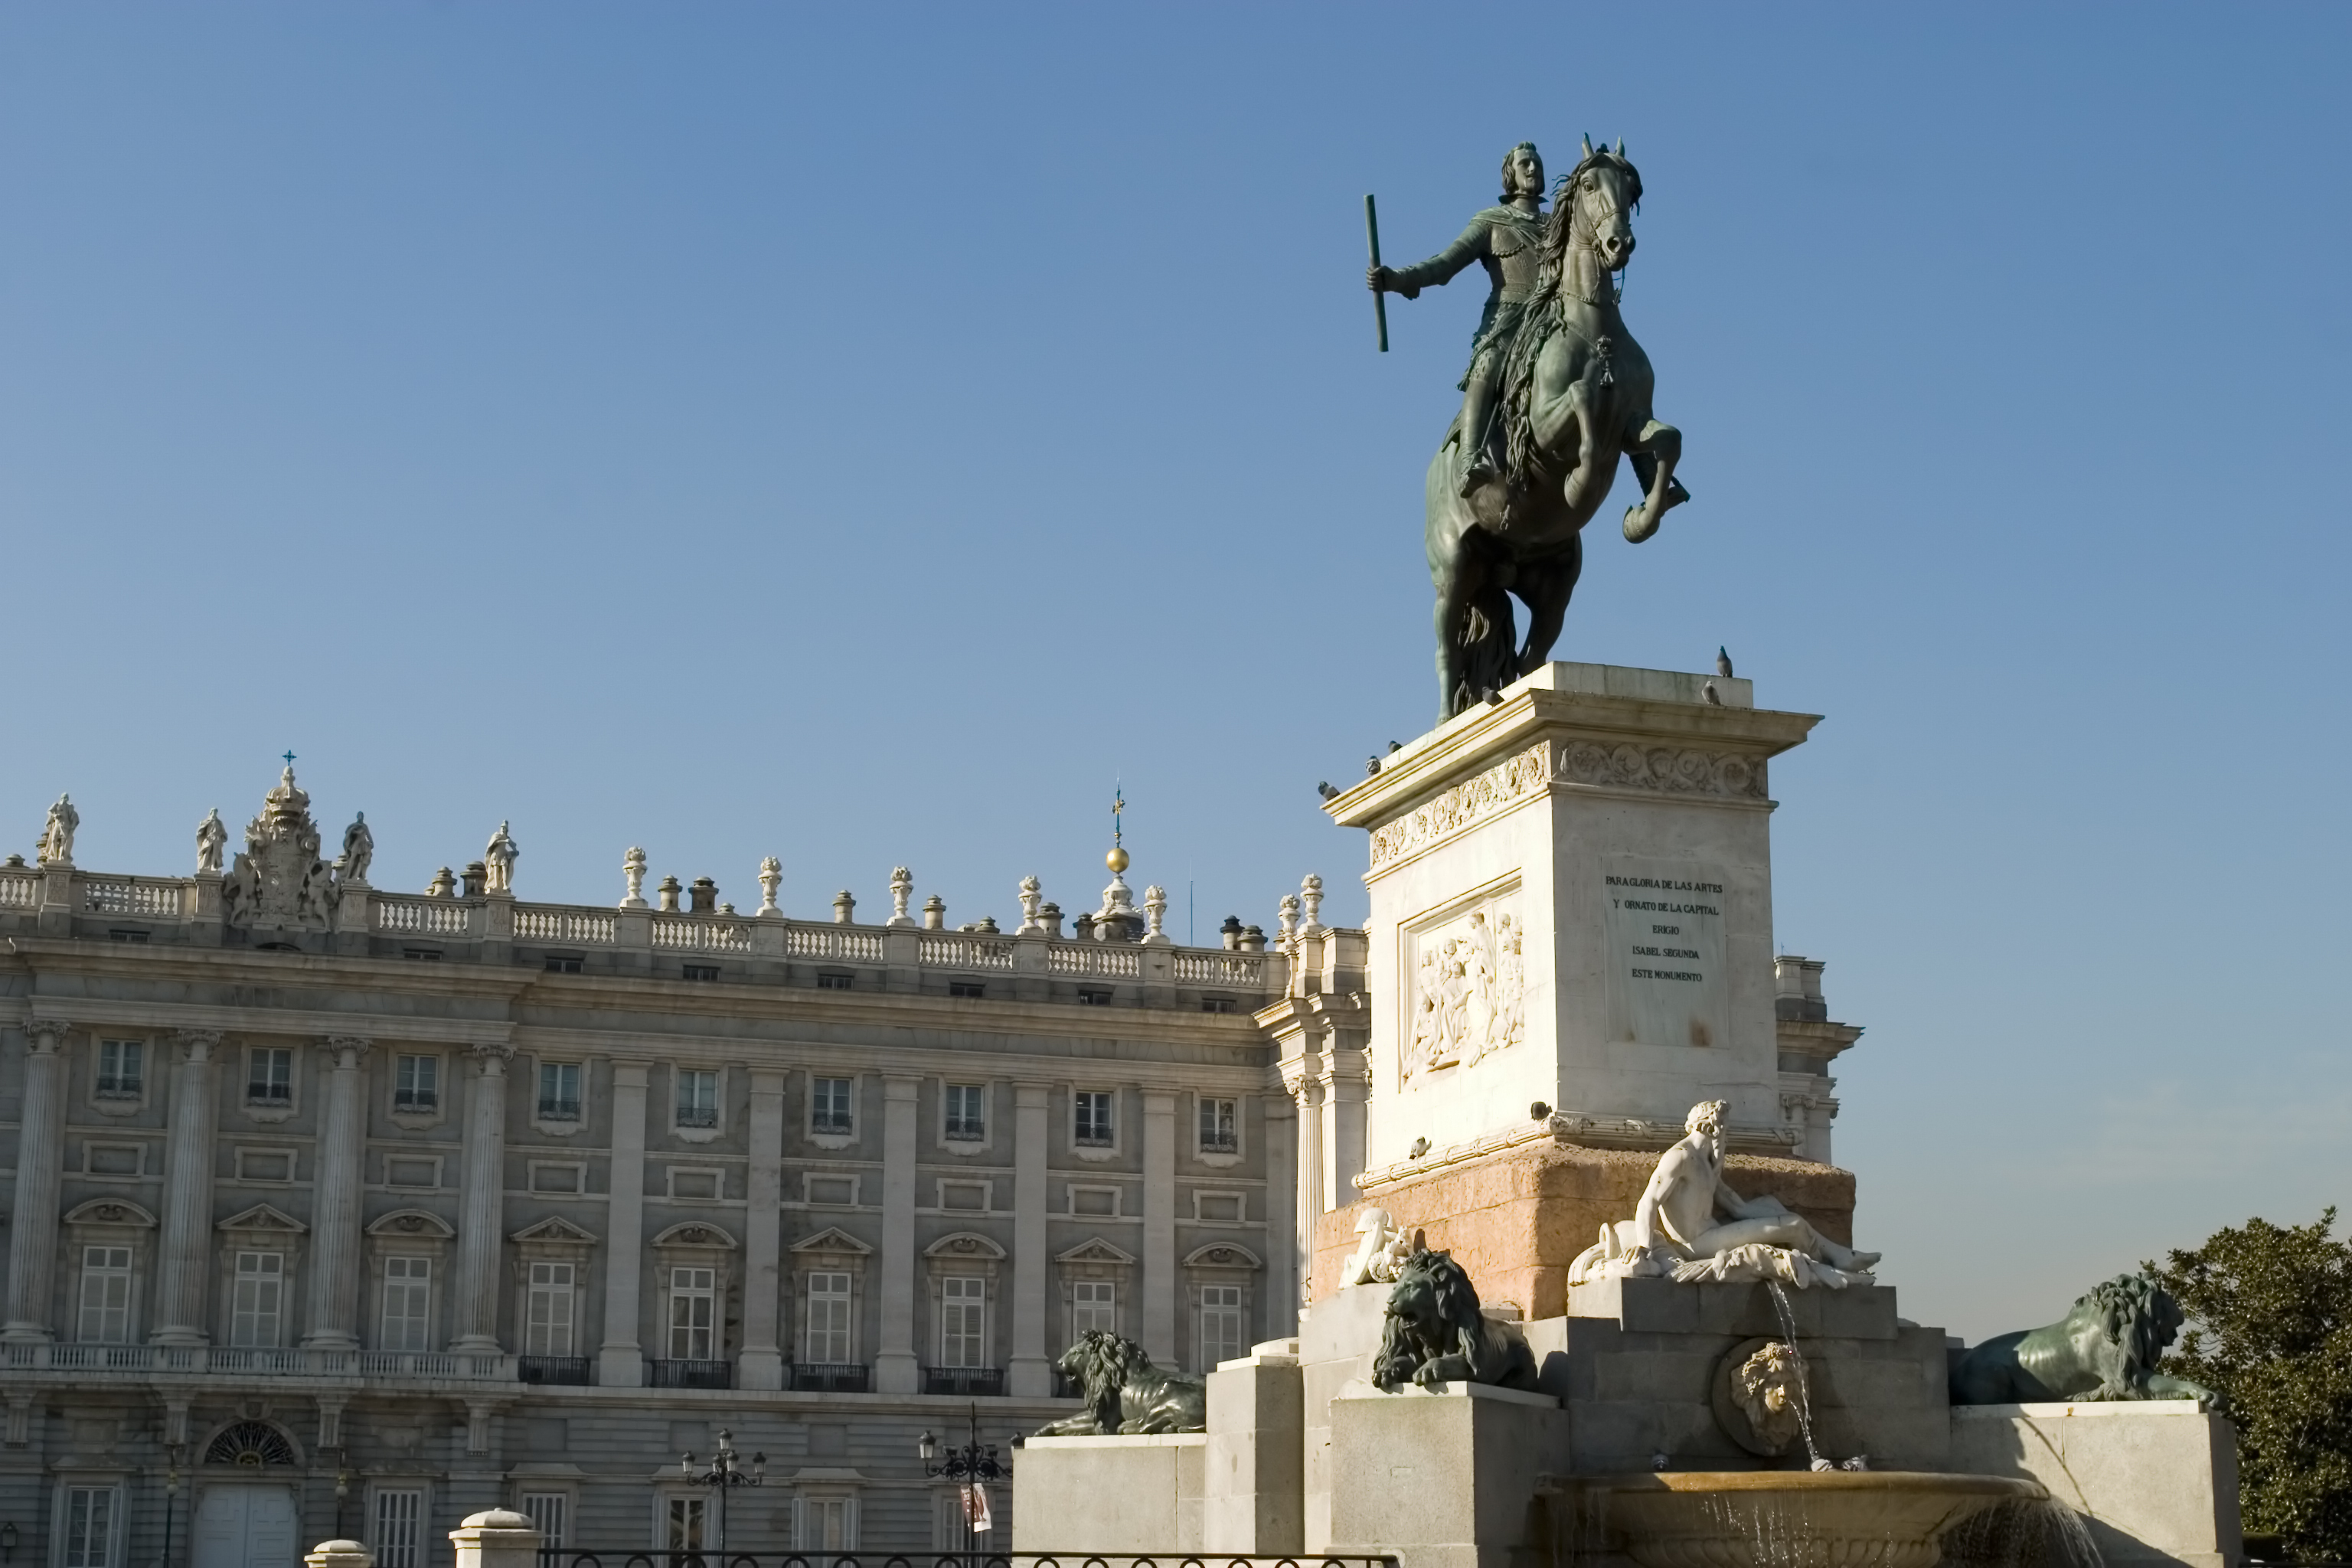 Royal Palace Statue of King, Madrid, Spain